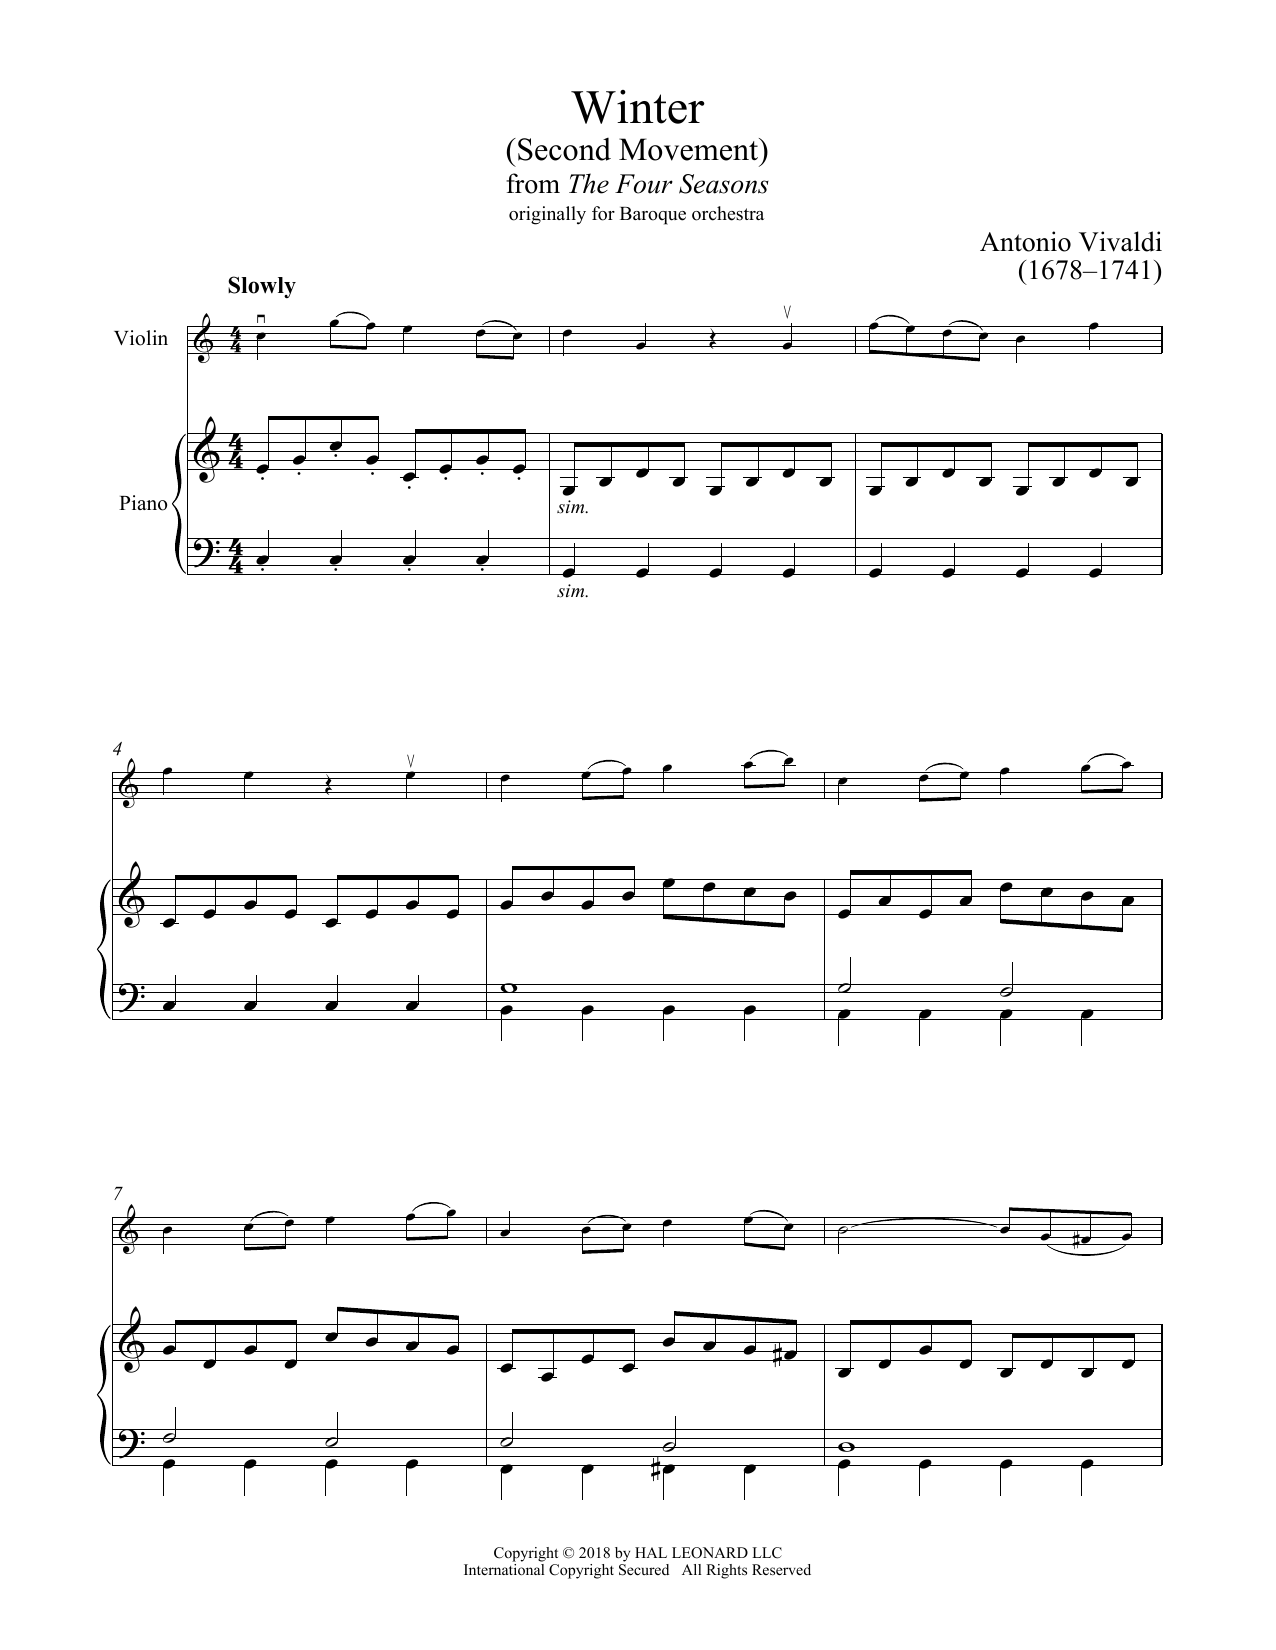 Antonio Vivaldi Winter from The Four Seasons (Second movement: Largo) sheet music notes and chords. Download Printable PDF.